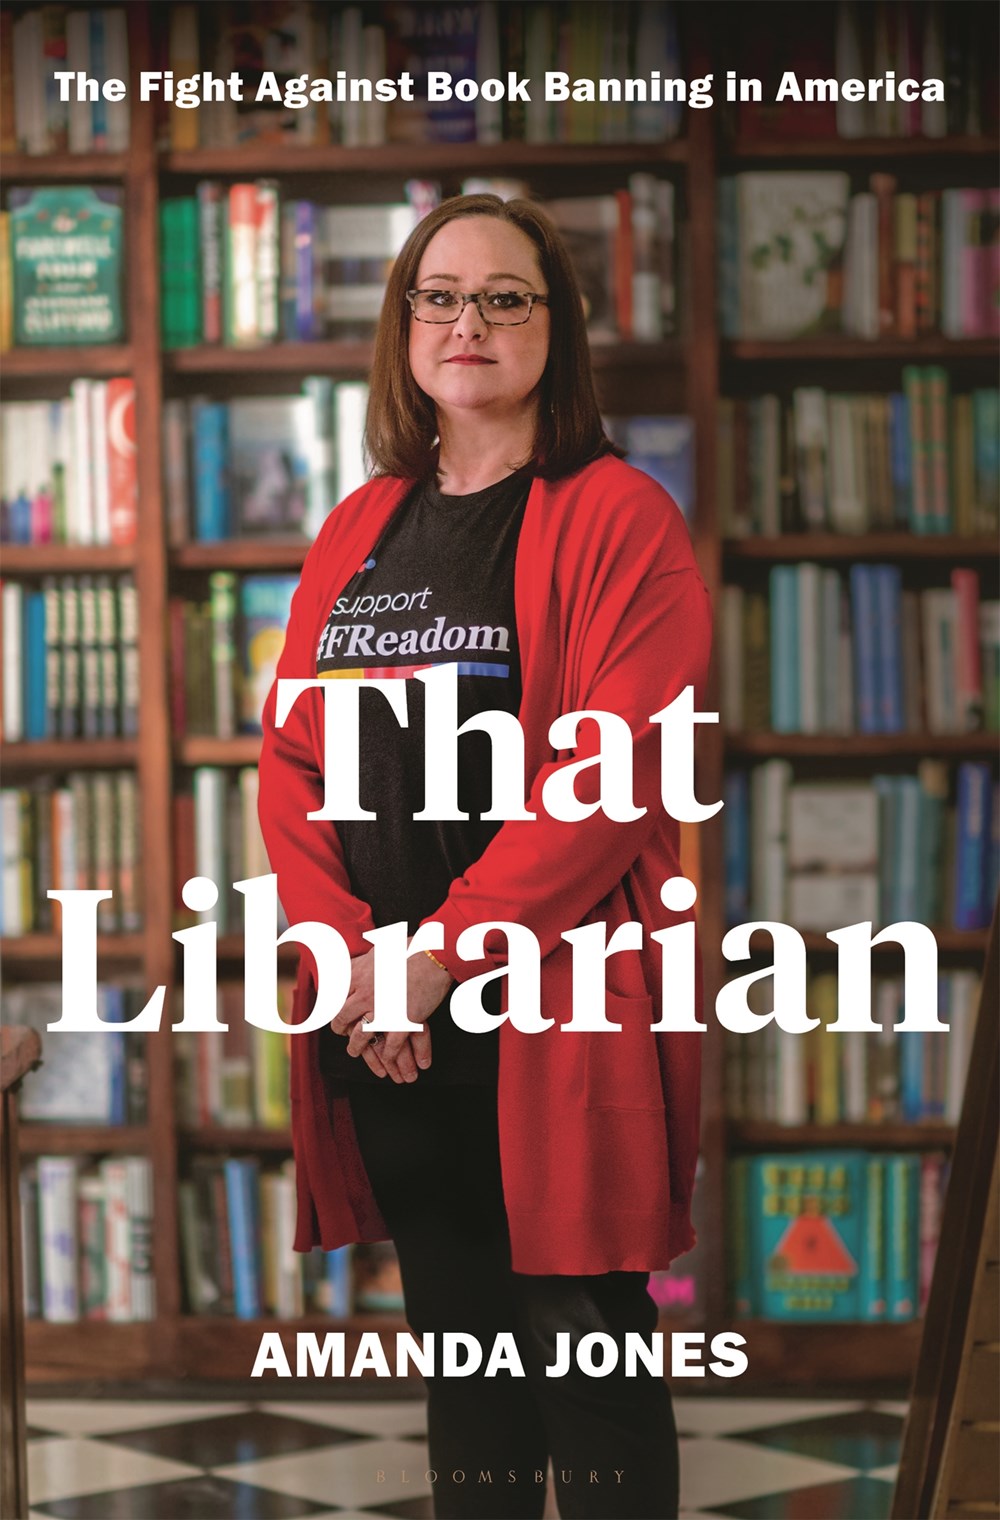 ‘That Librarian: The Fight Against Book Banning in America’ by Amanda Jones | LJ Review of the Day